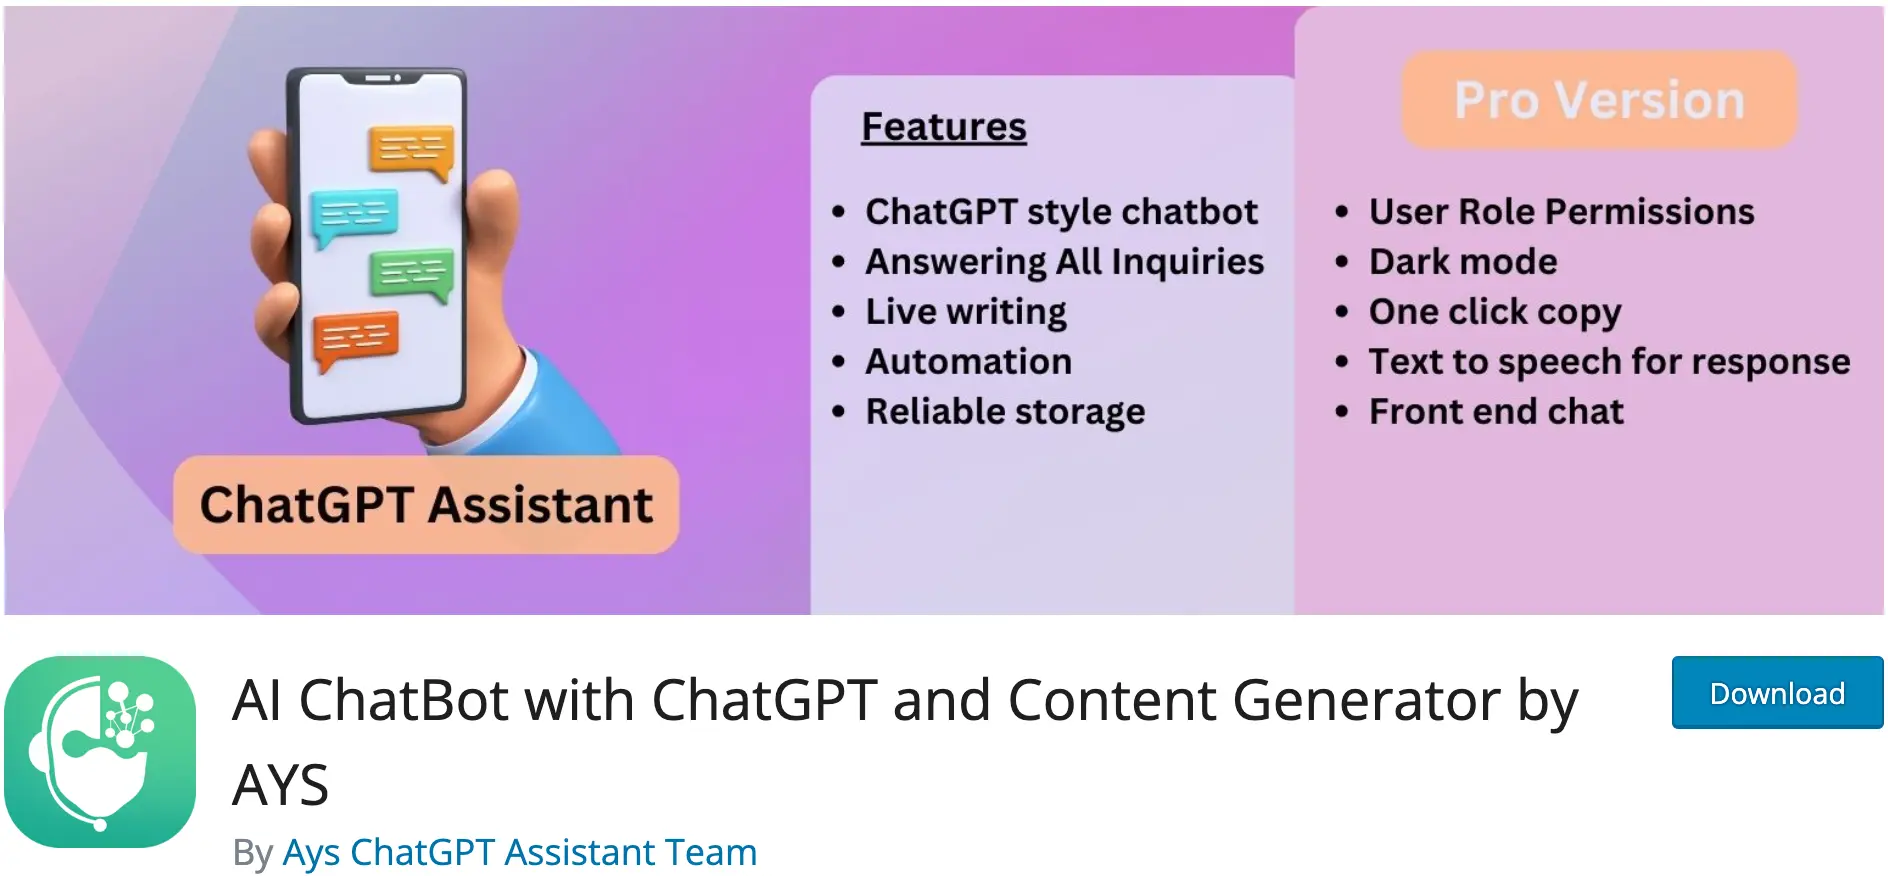 AI ChatBot with ChatGPT by AYS